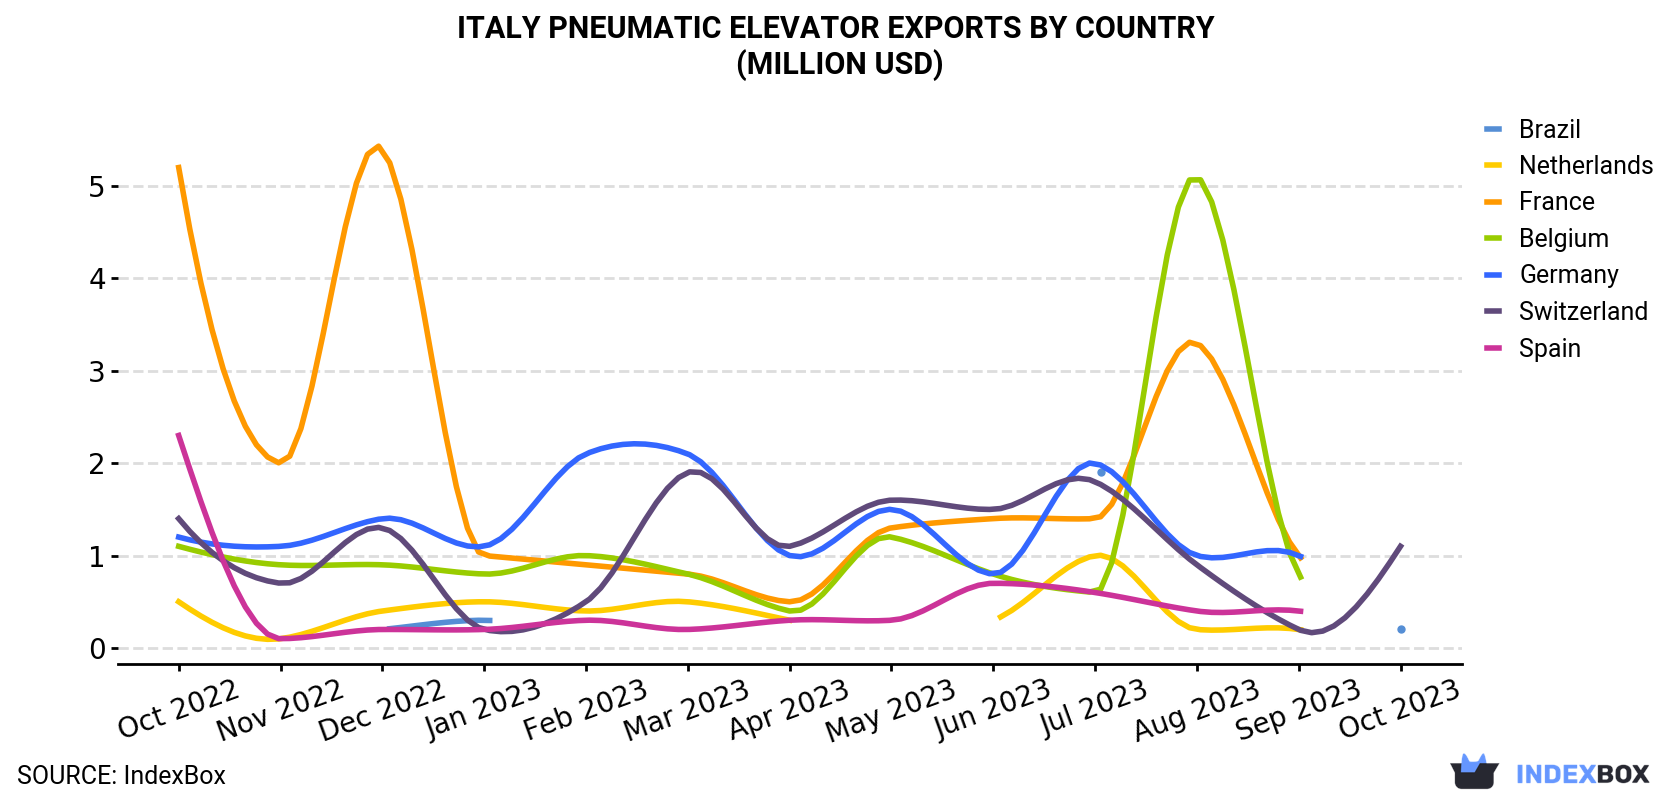 Italy Pneumatic Elevator Exports By Country (Million USD)